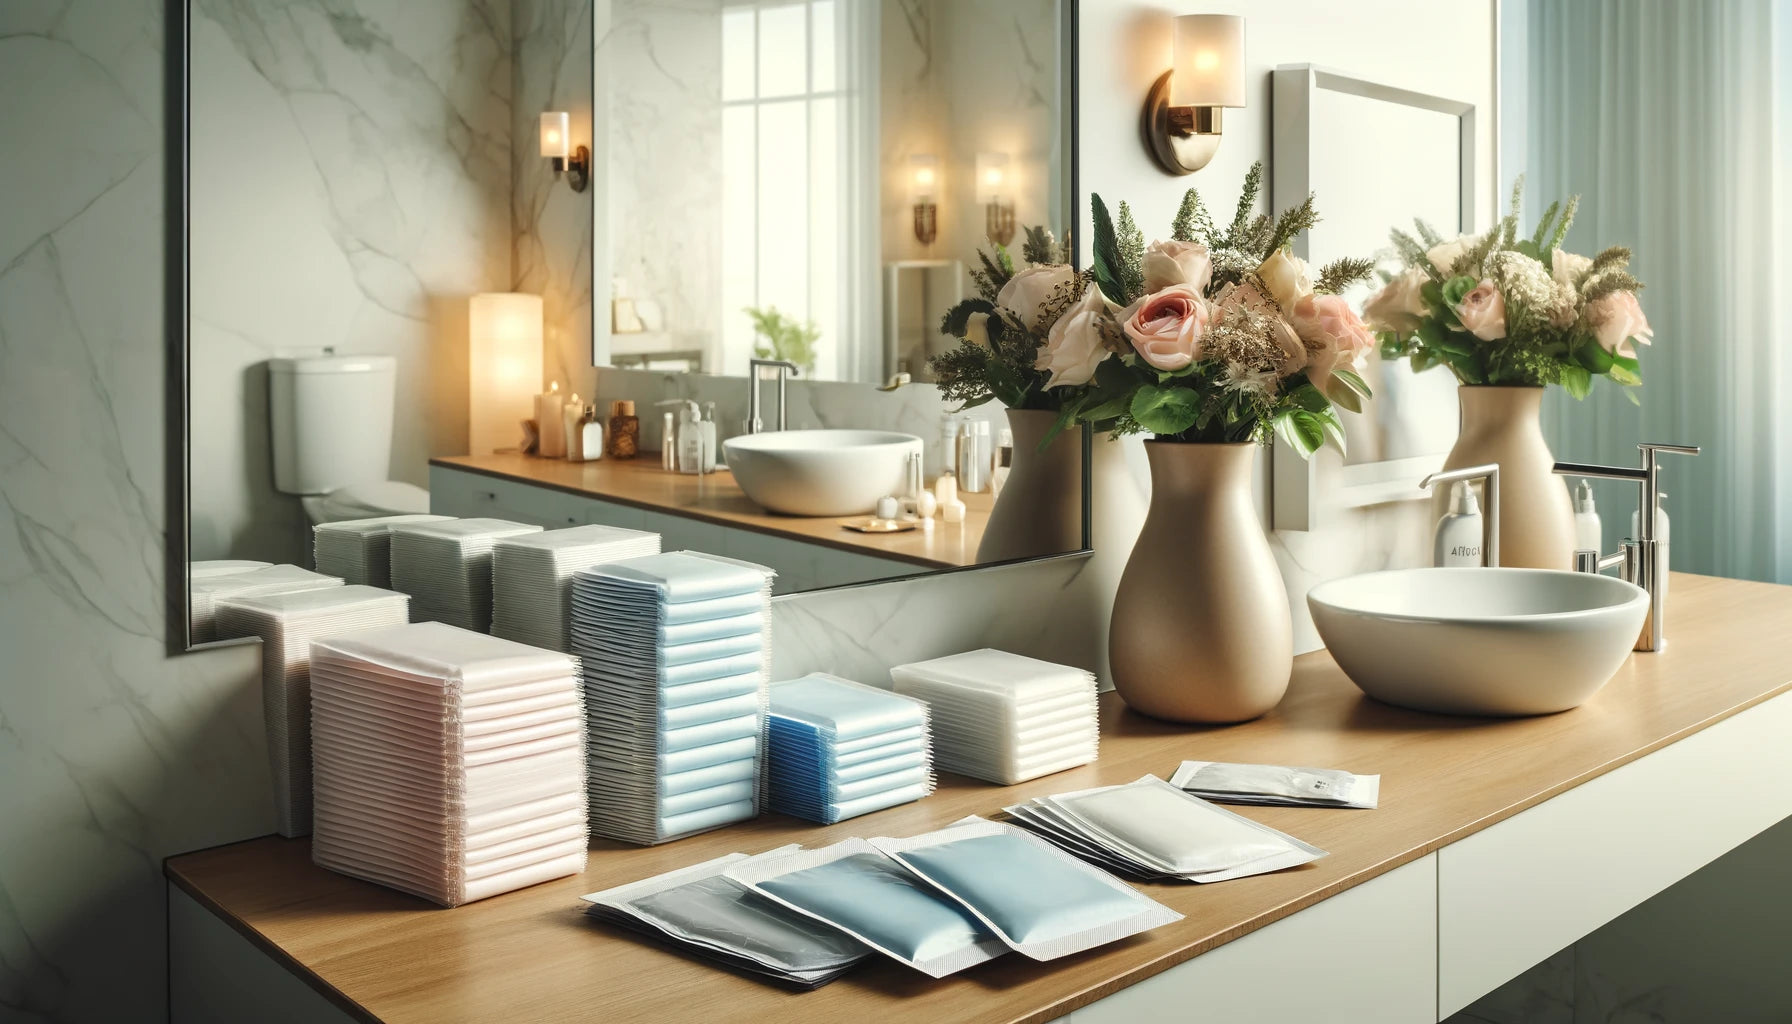 A clean, well-organized bathroom countertop featuring various silicone scar sheets in neat packaging, with bright lighting and a vase of fresh flowers